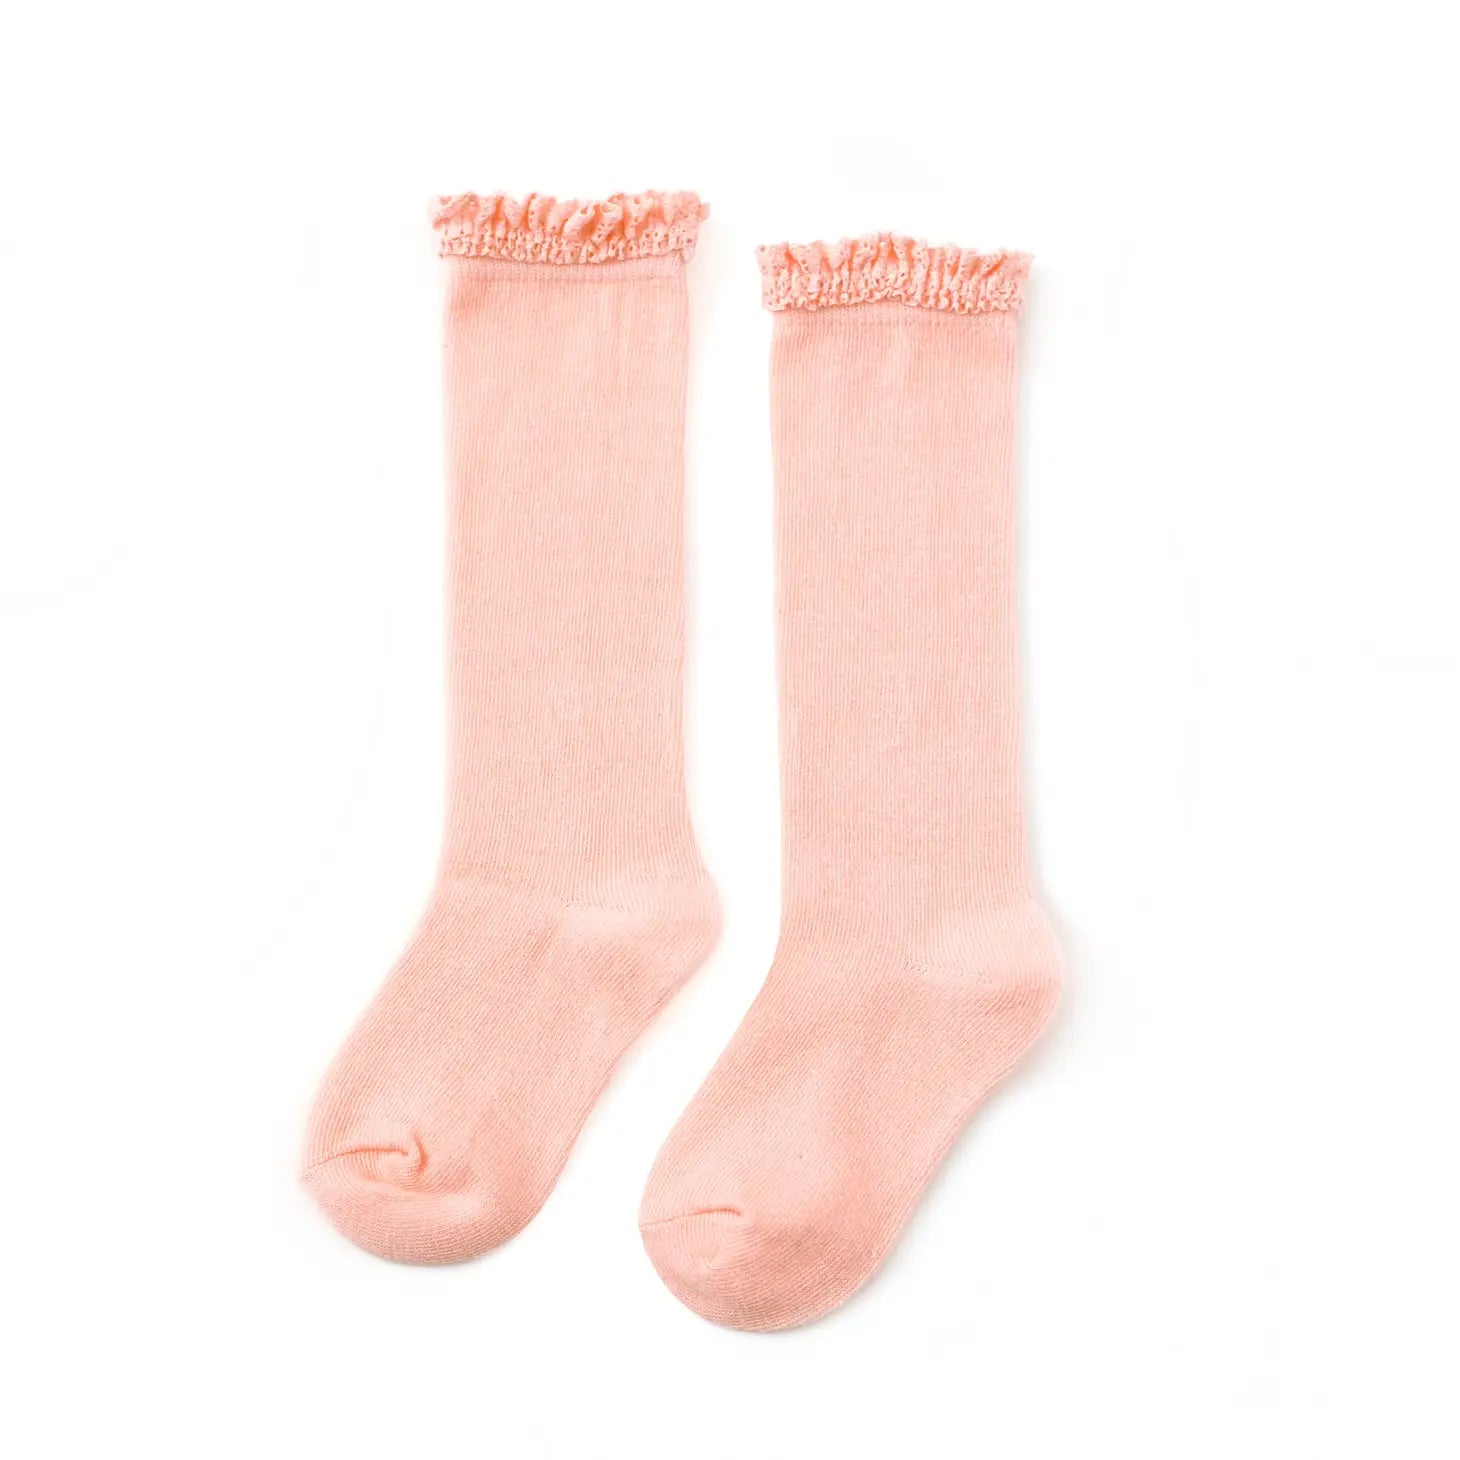 Baby & Children's Boutique. Little Stocking Co. Lace Top Knee High Socks,  Stockings. – Pink Rubies Boutique